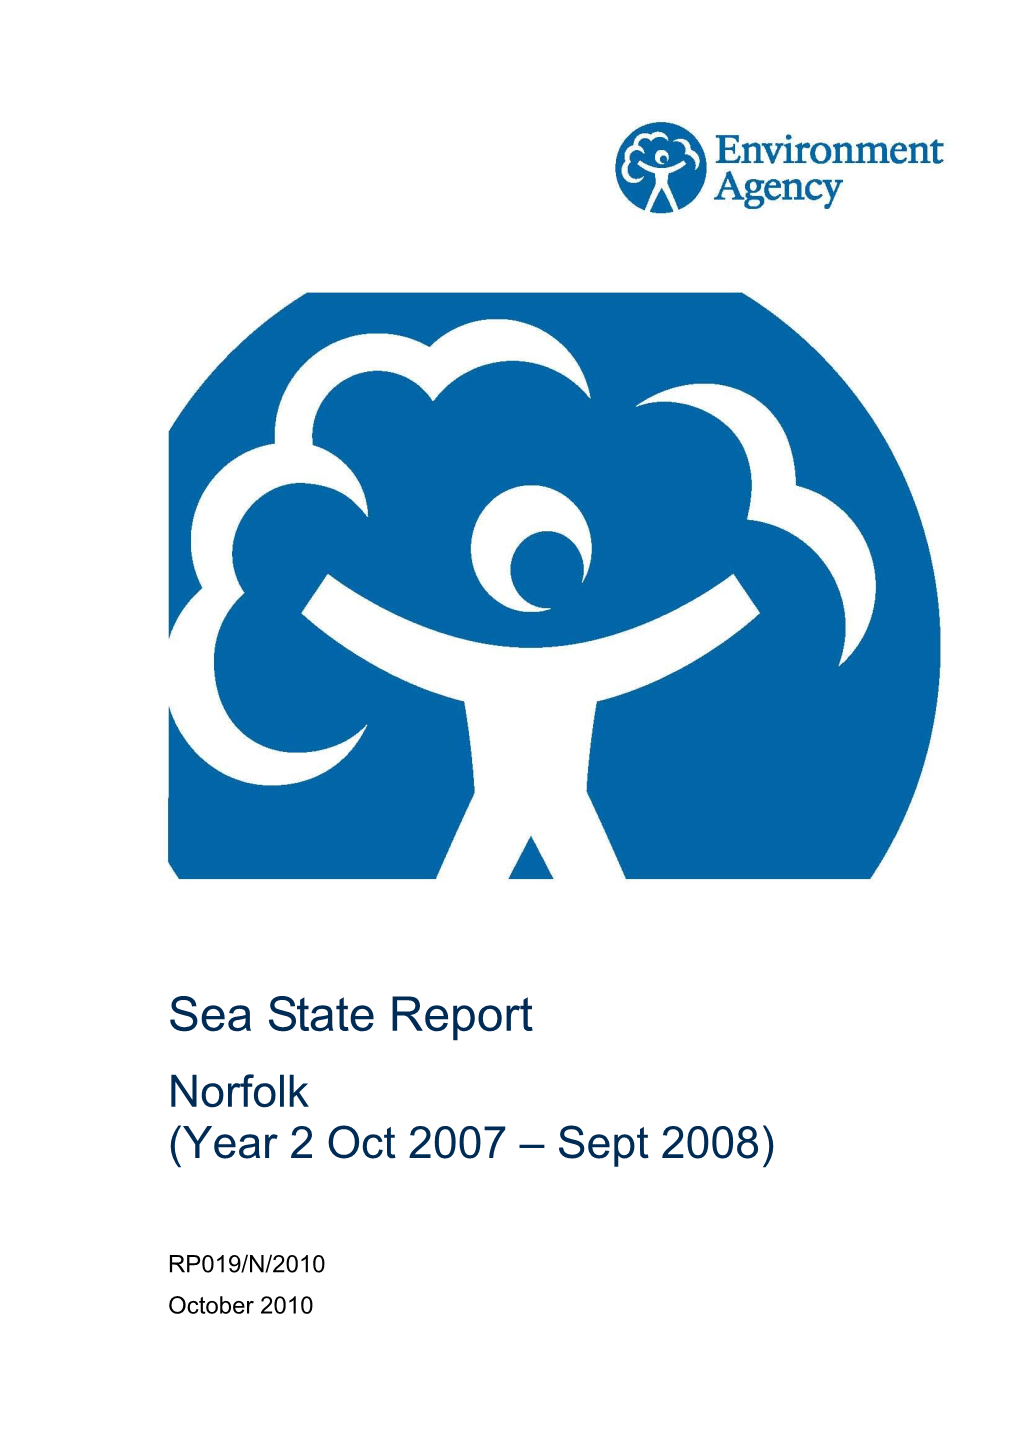 Sea State Report Norfolk (Year 2 Oct 2007 – Sept 2008)